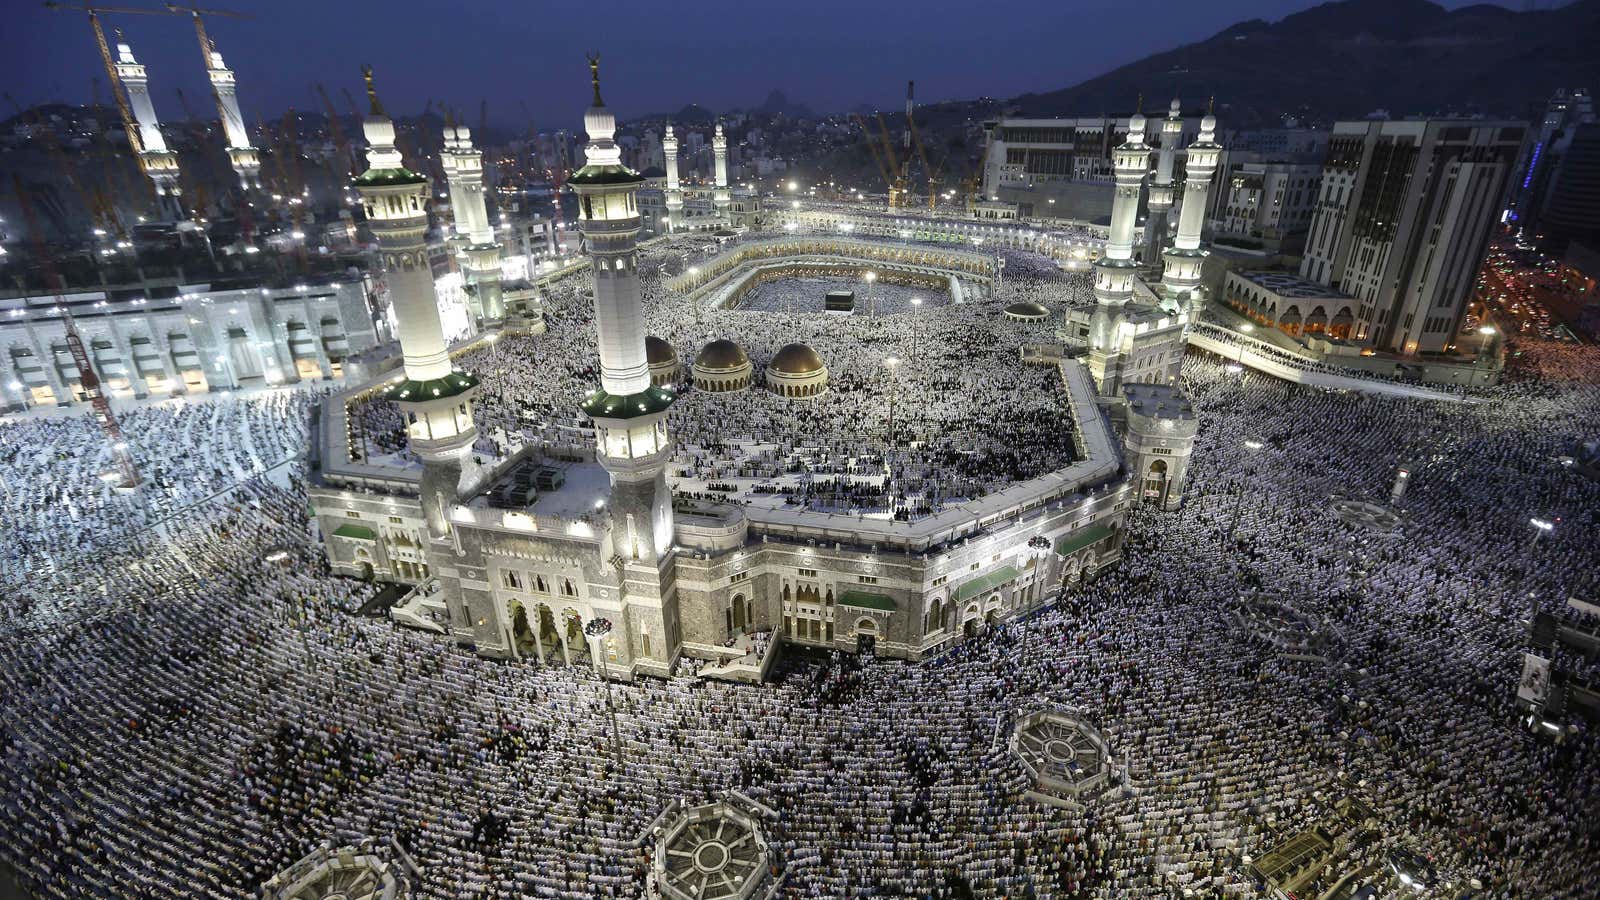 Bring your phone to Mecca.